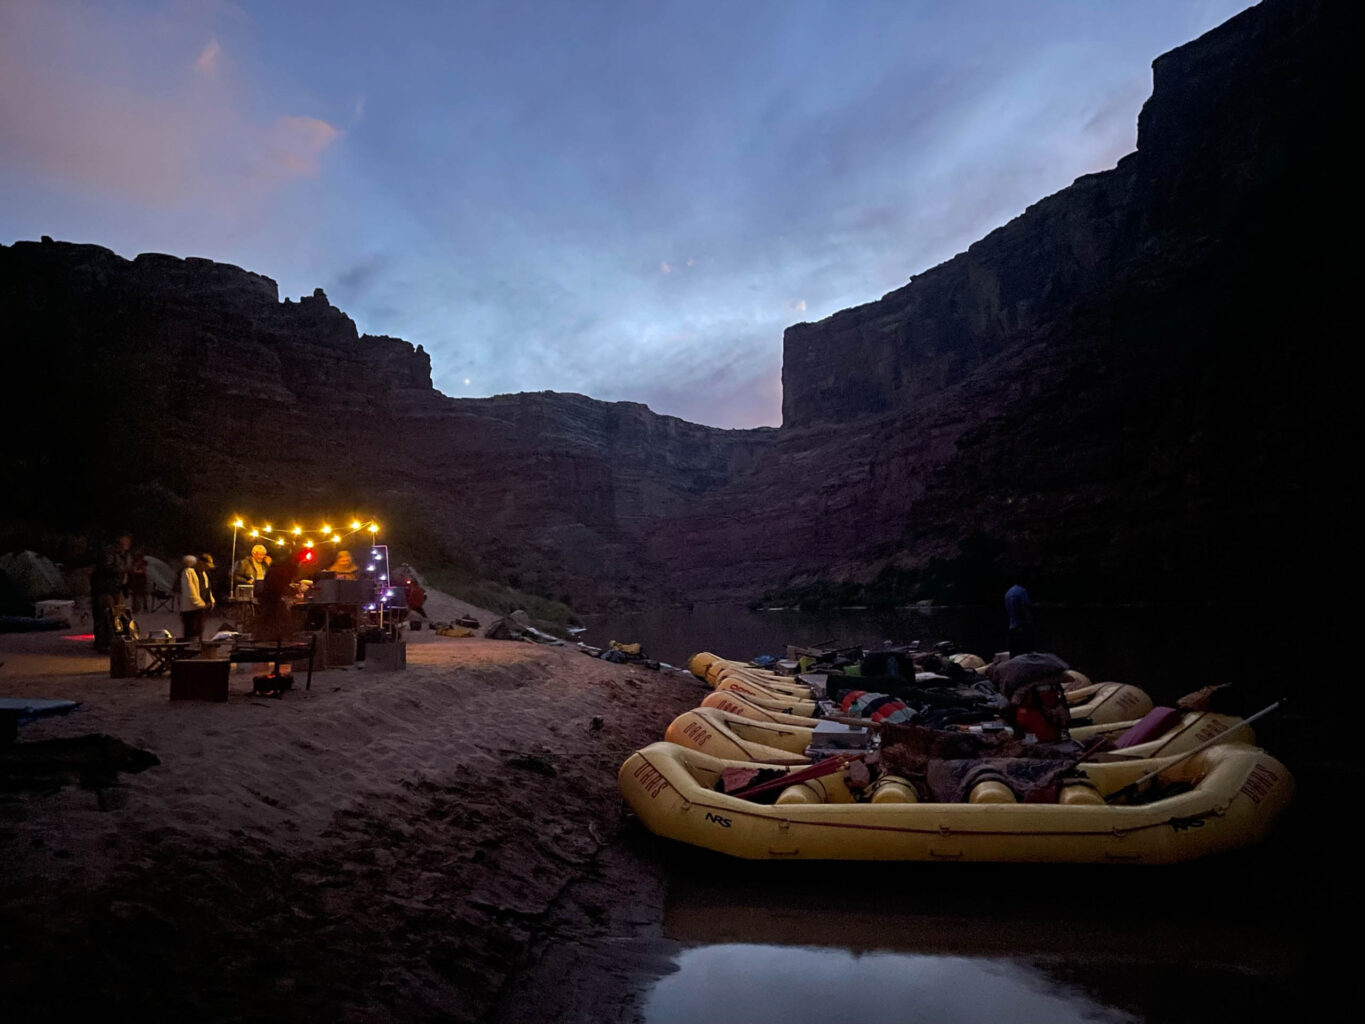 Rafting group camp set up at night in Canyonlands National Park.